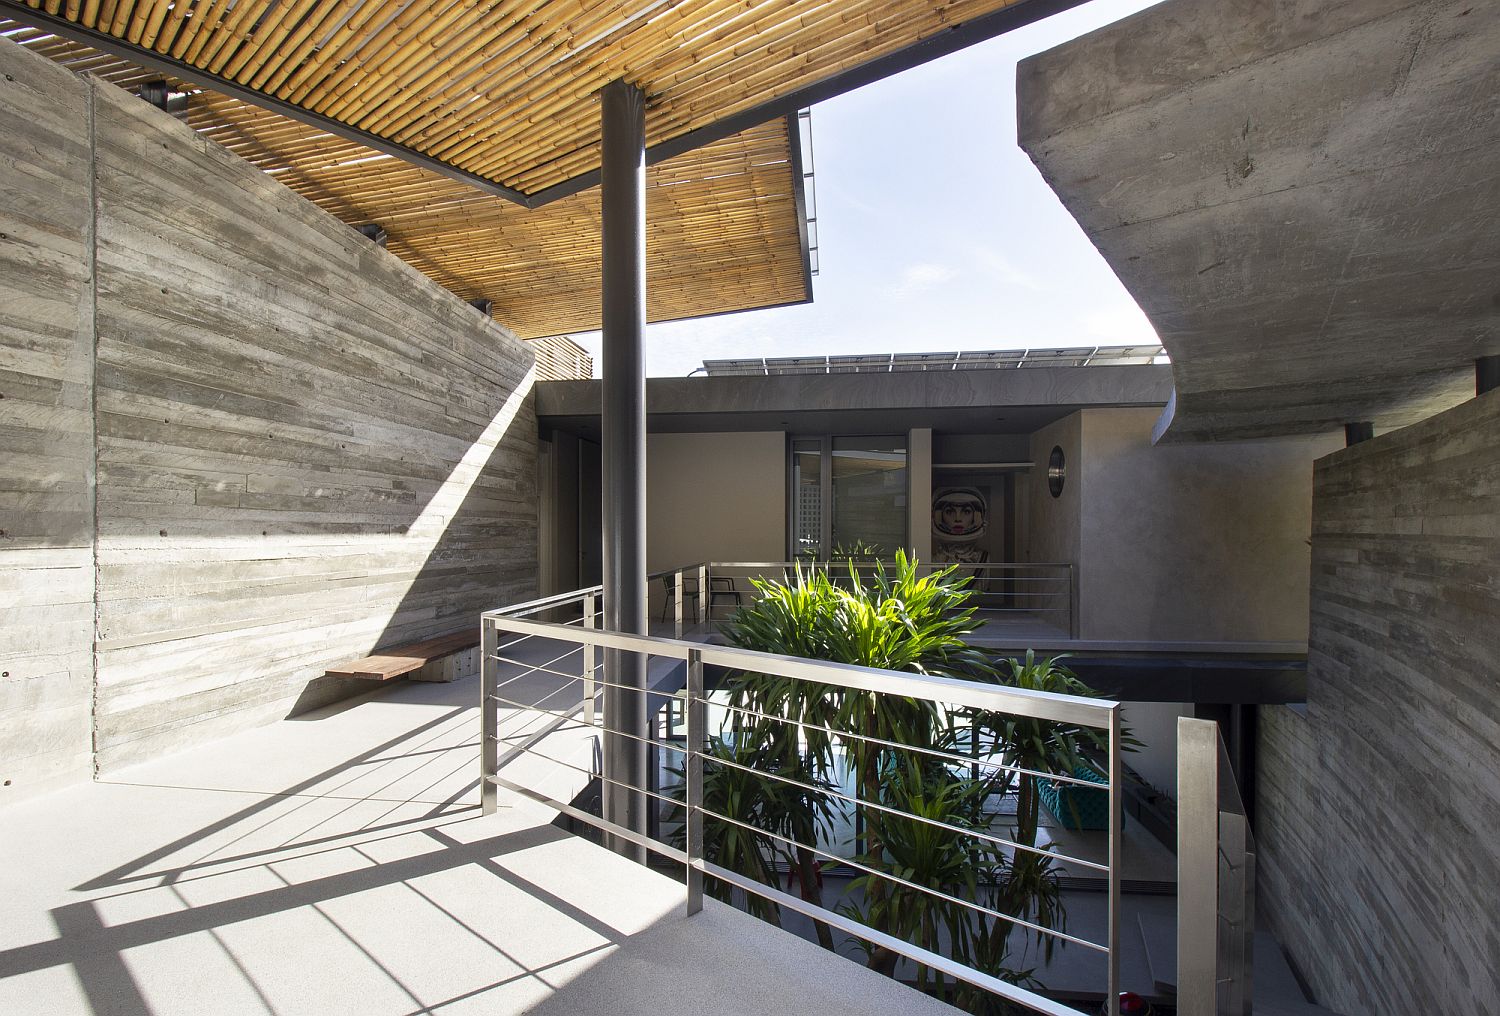 Bamboo screens and blinds protect the courtyard of the house